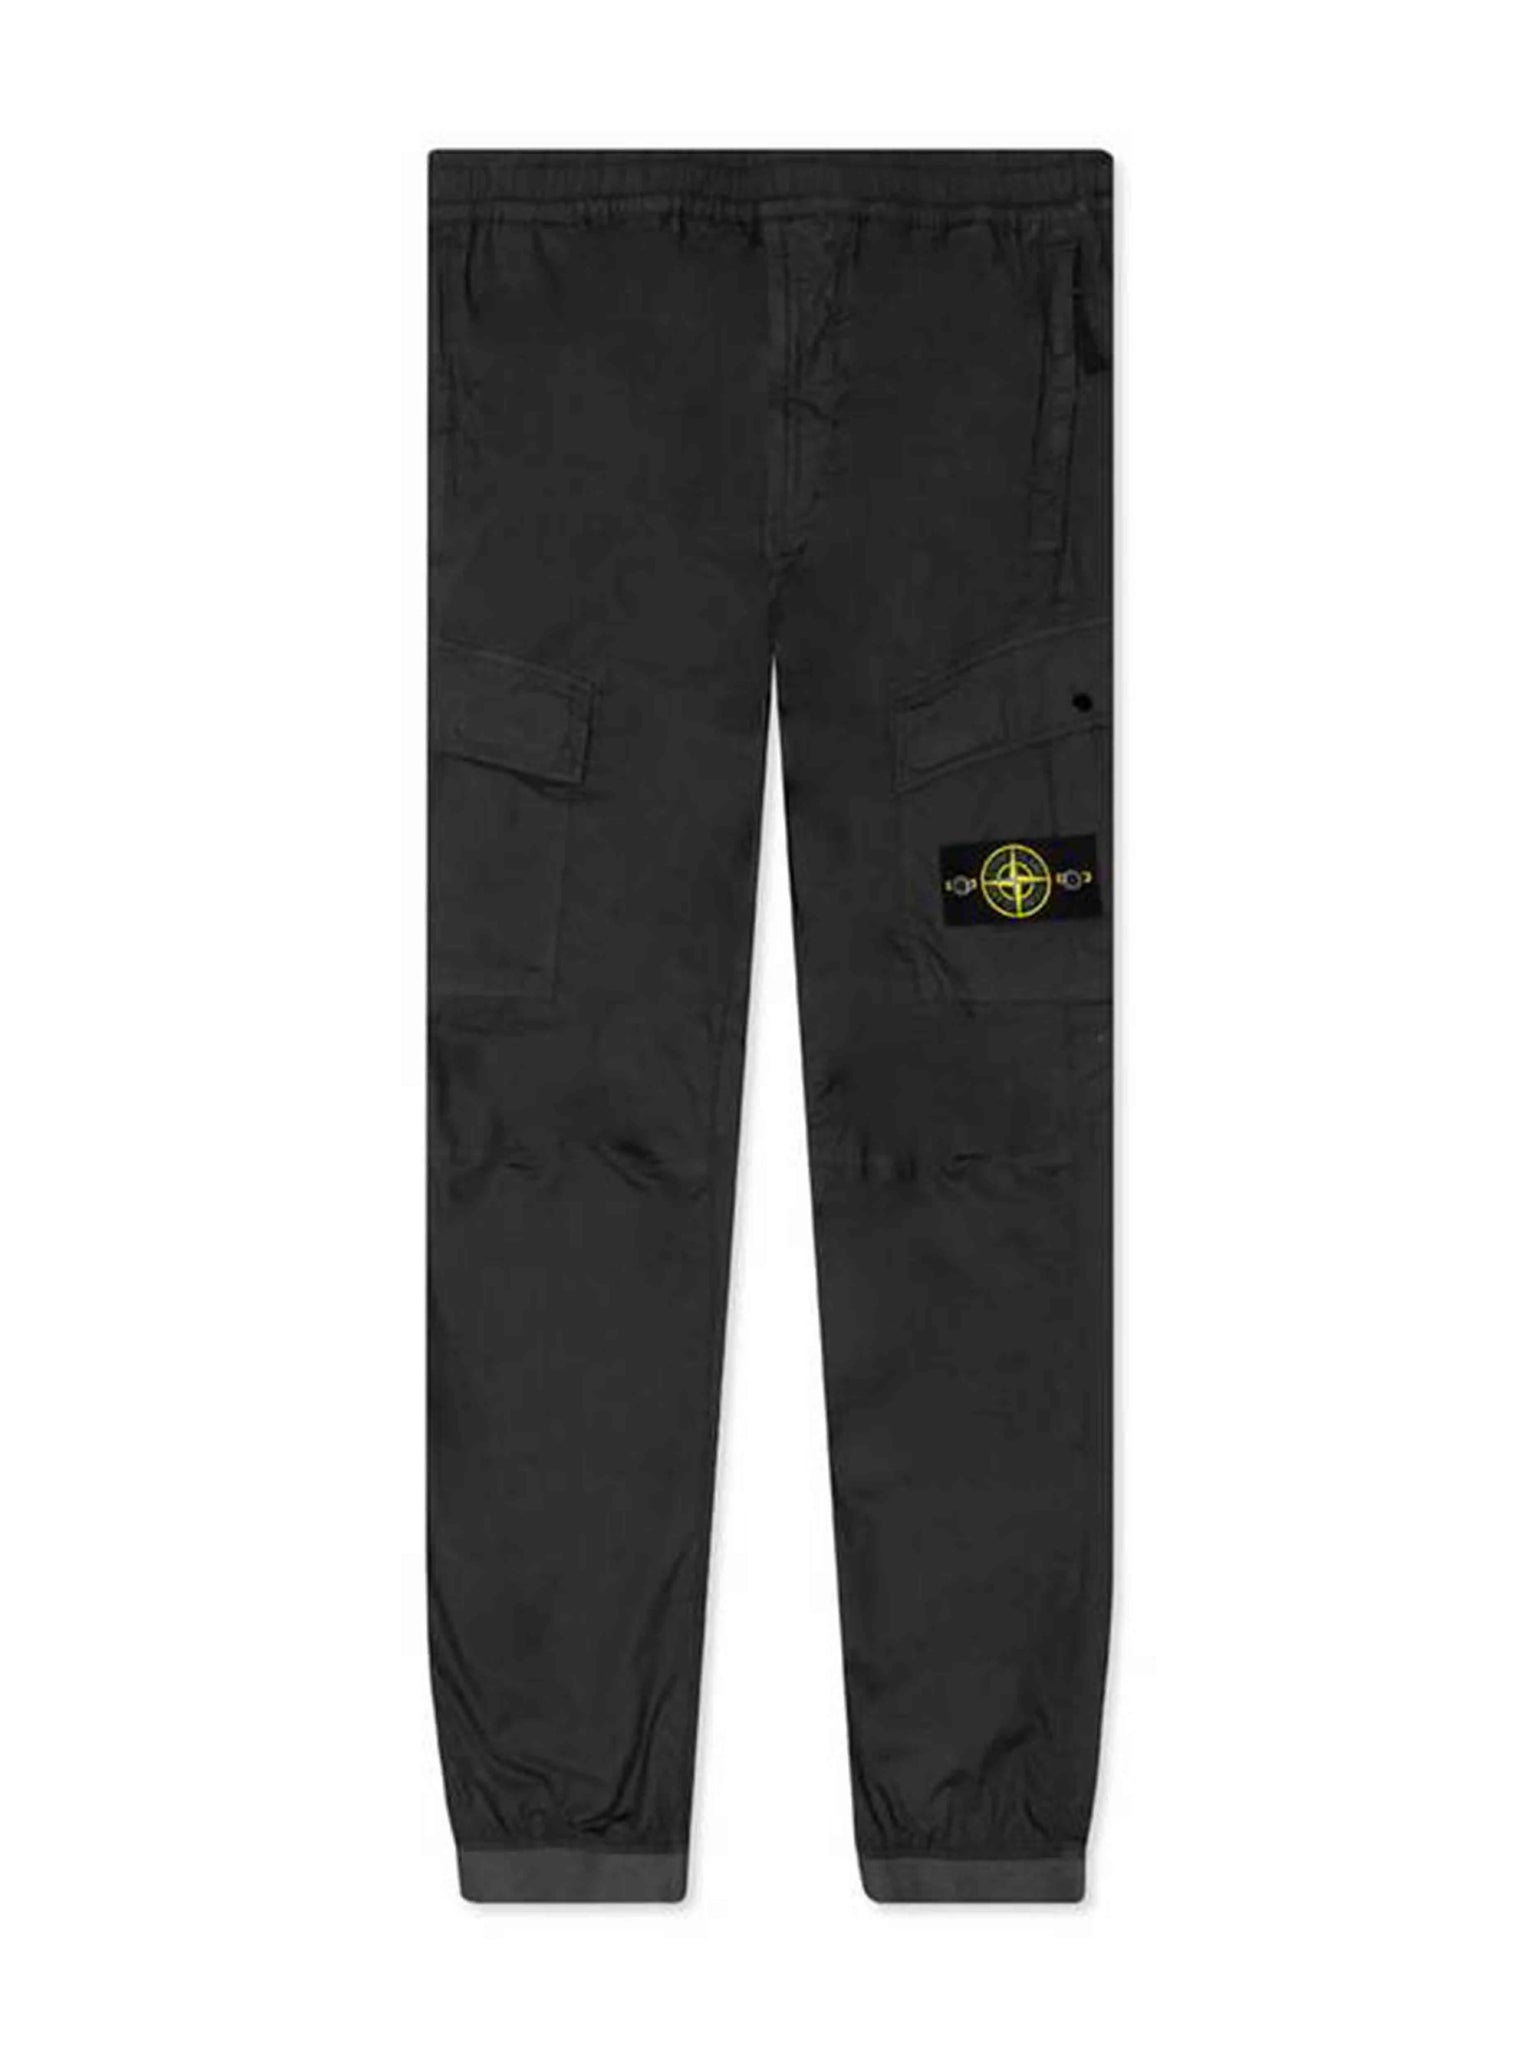 Stone Island Cotton Stretch Cargo Pants Charcoal Prior